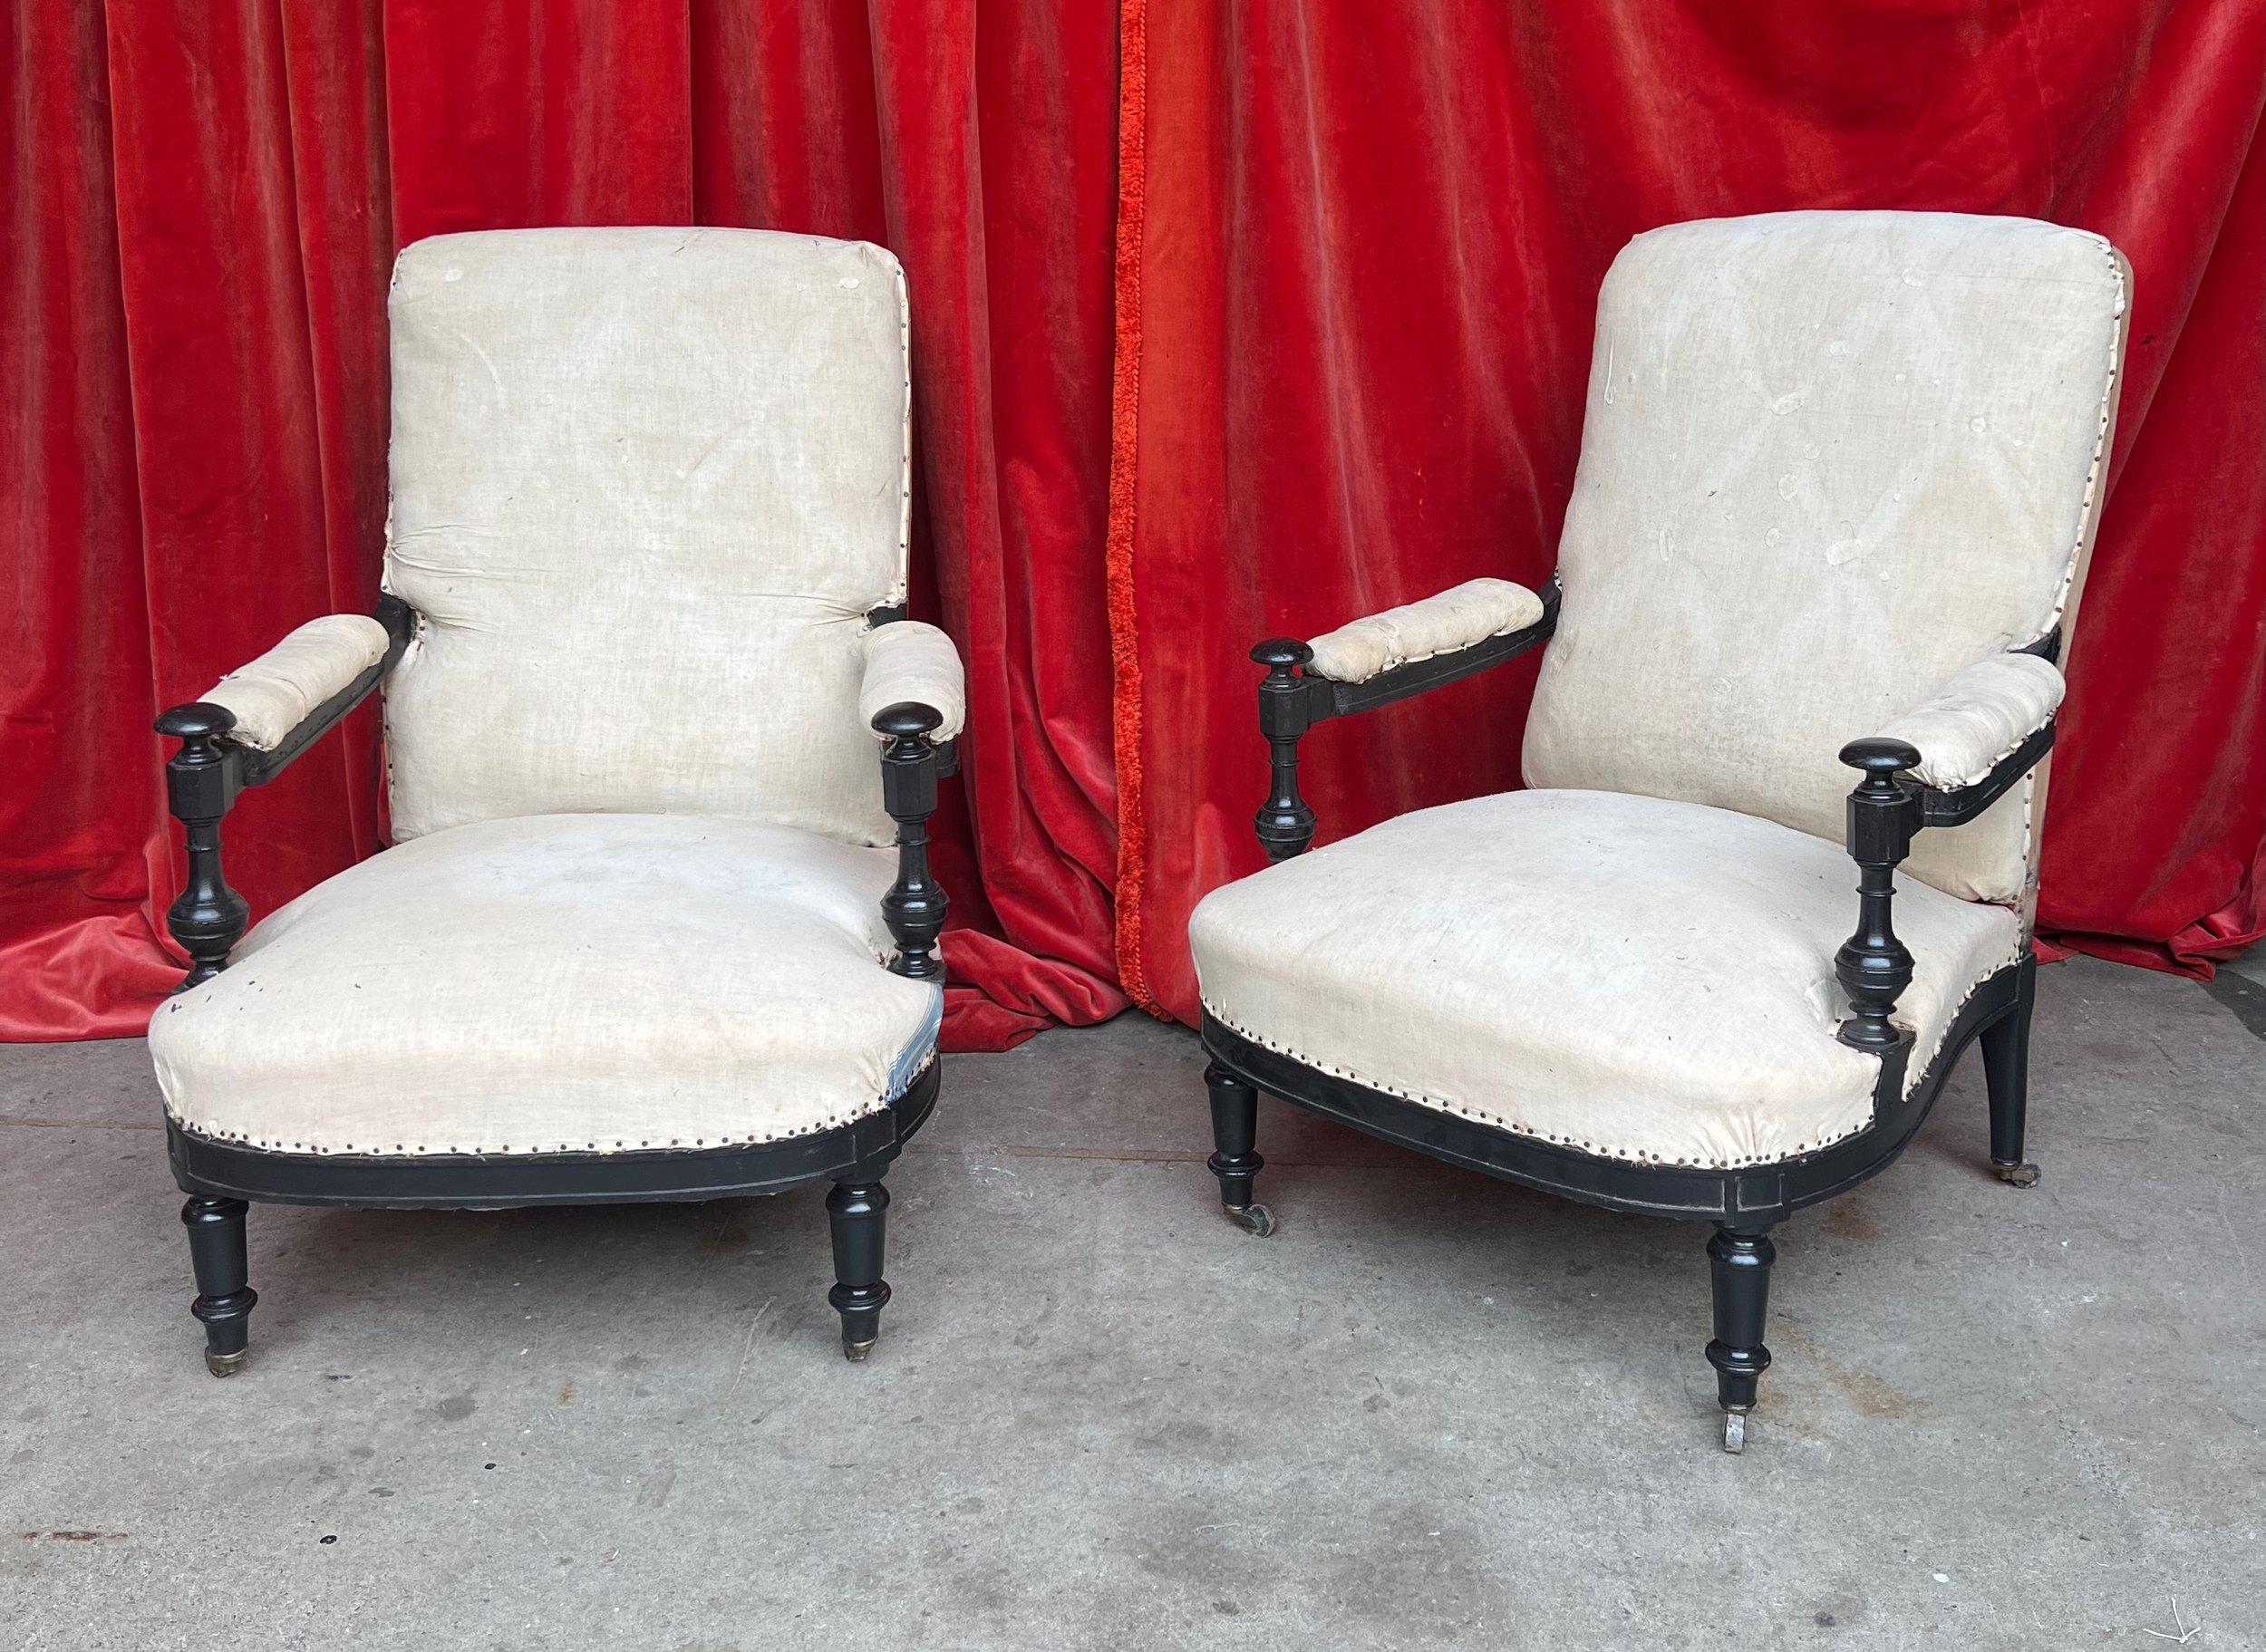 An extraordinary pair of French Napoleon III armchairs, featuring exposed wooden arms and classic turned legs. These 19th-century chairs captivate with their beautiful wooden spindle arm details, adding sophistication and elegance to any living